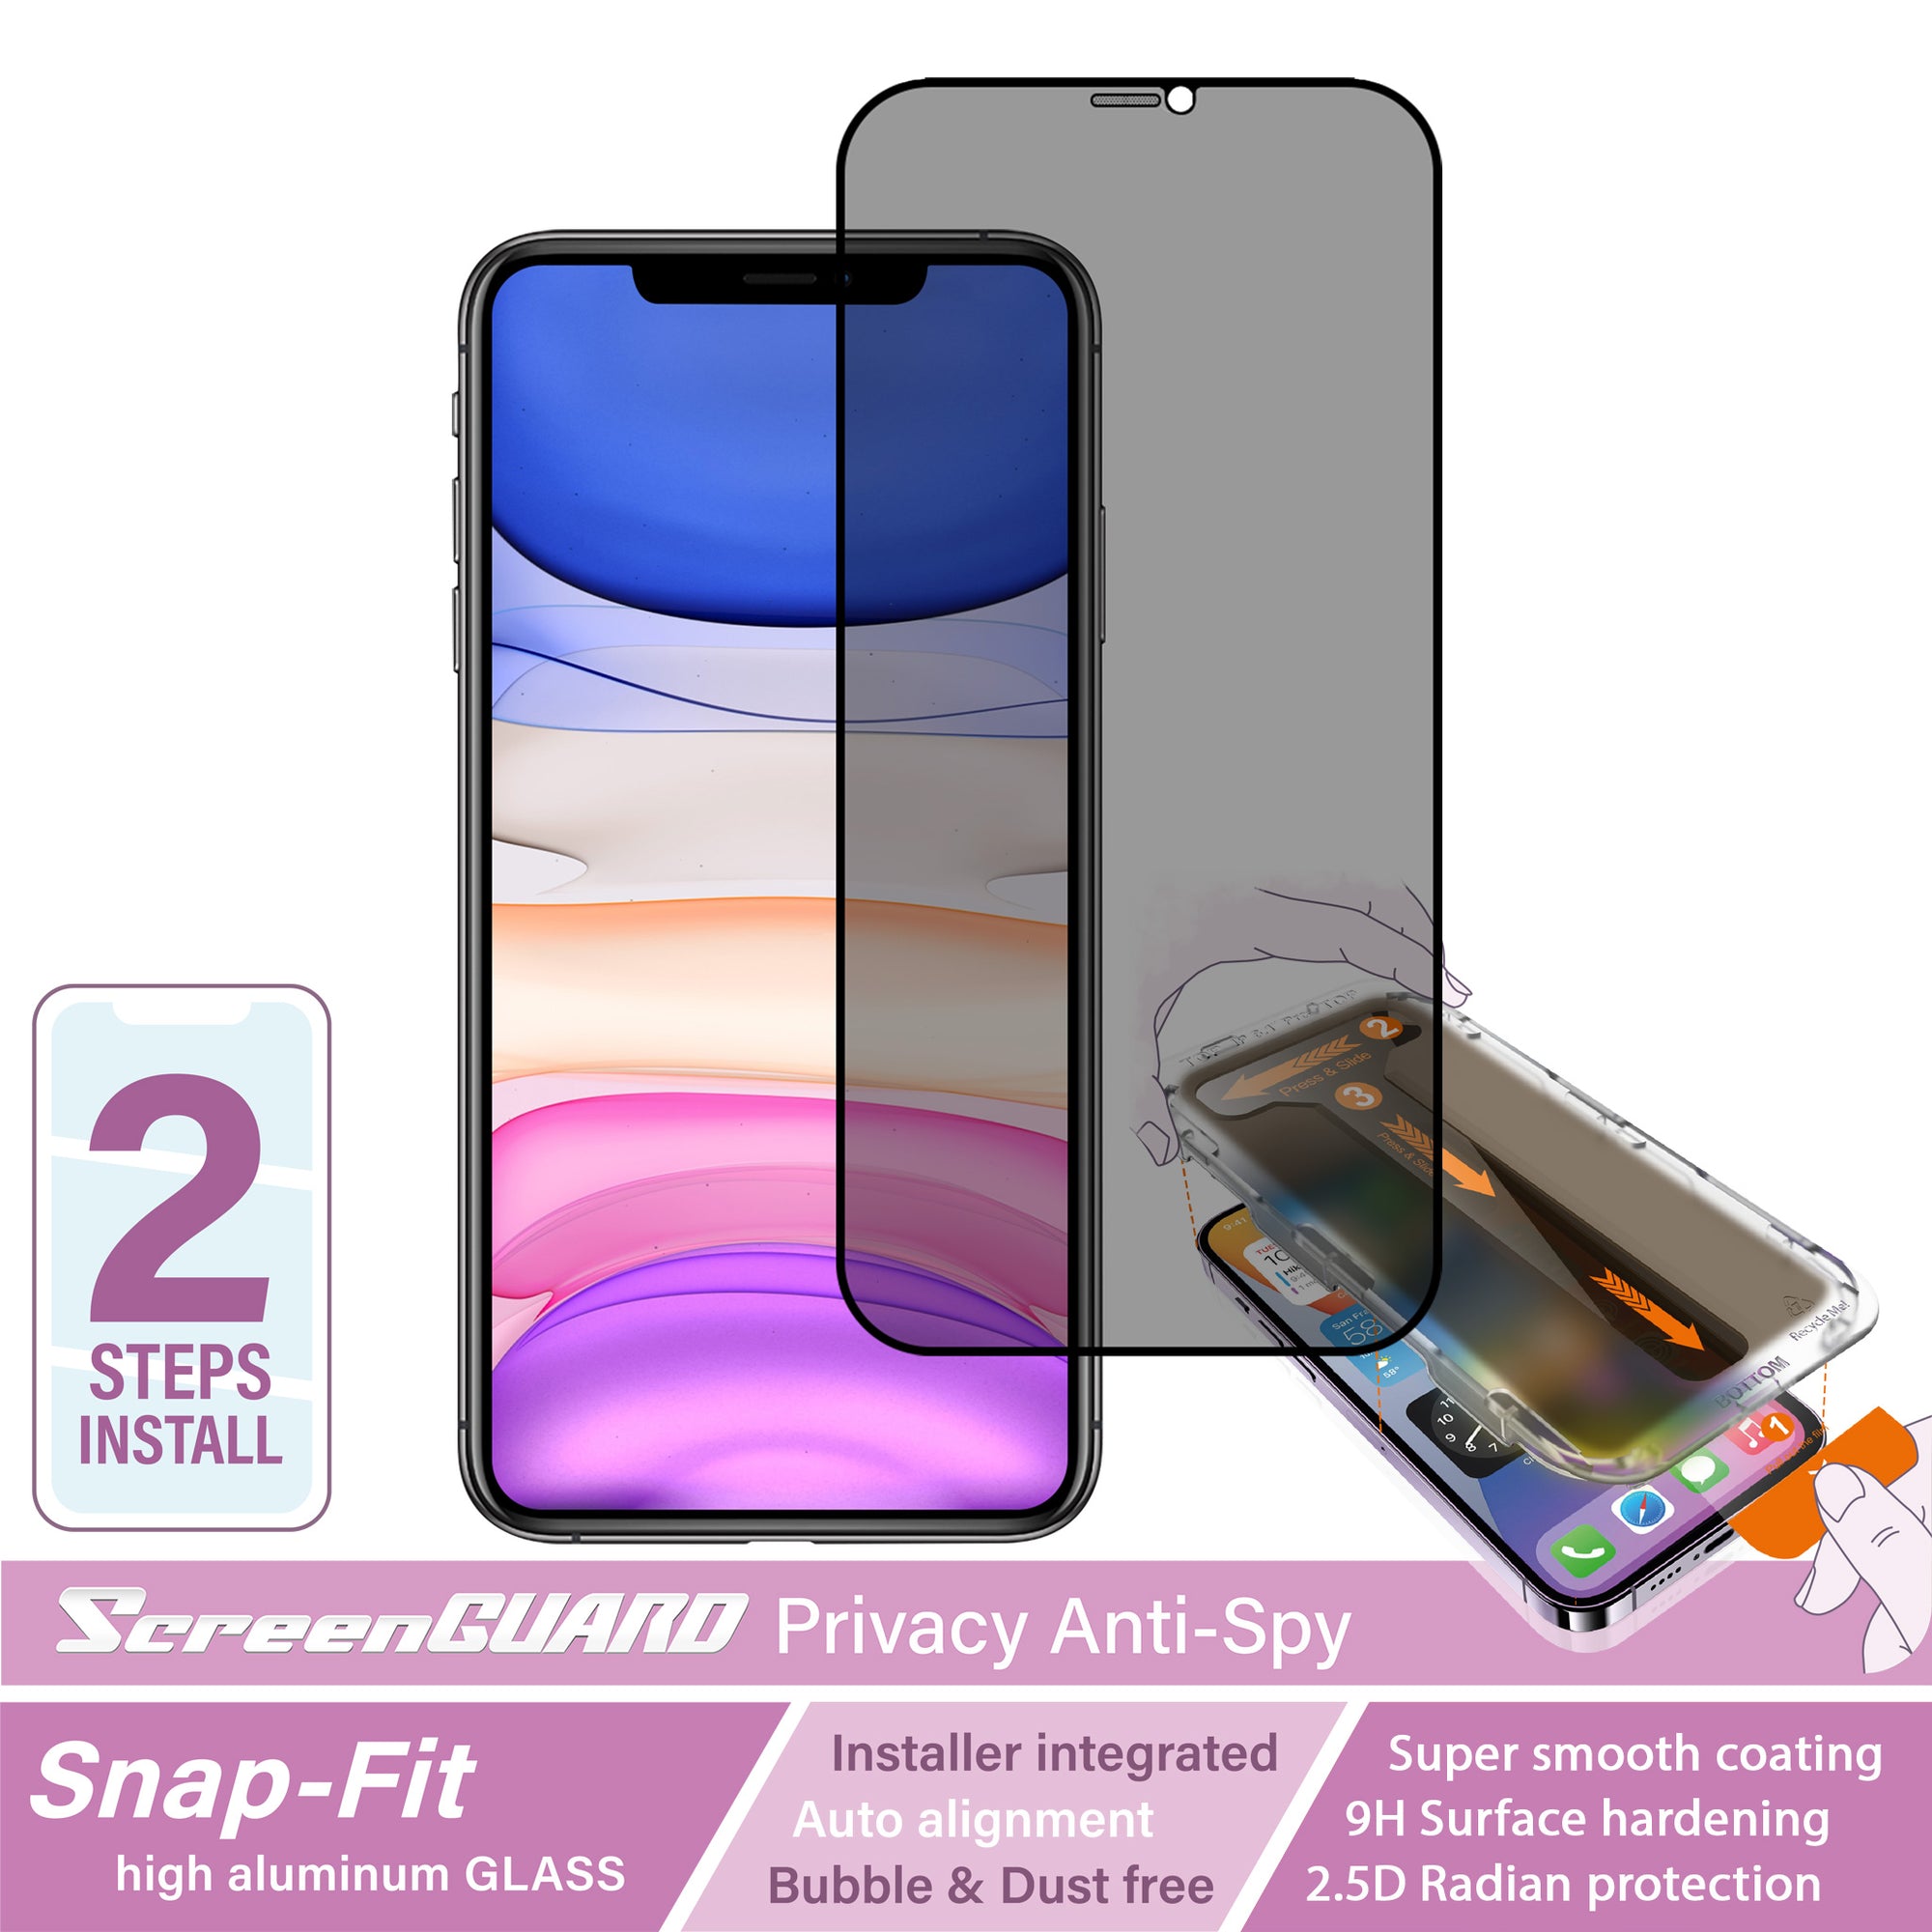 iPhone 11 Pro SnapFit High Aluminum Glass Privacy Screen Protector